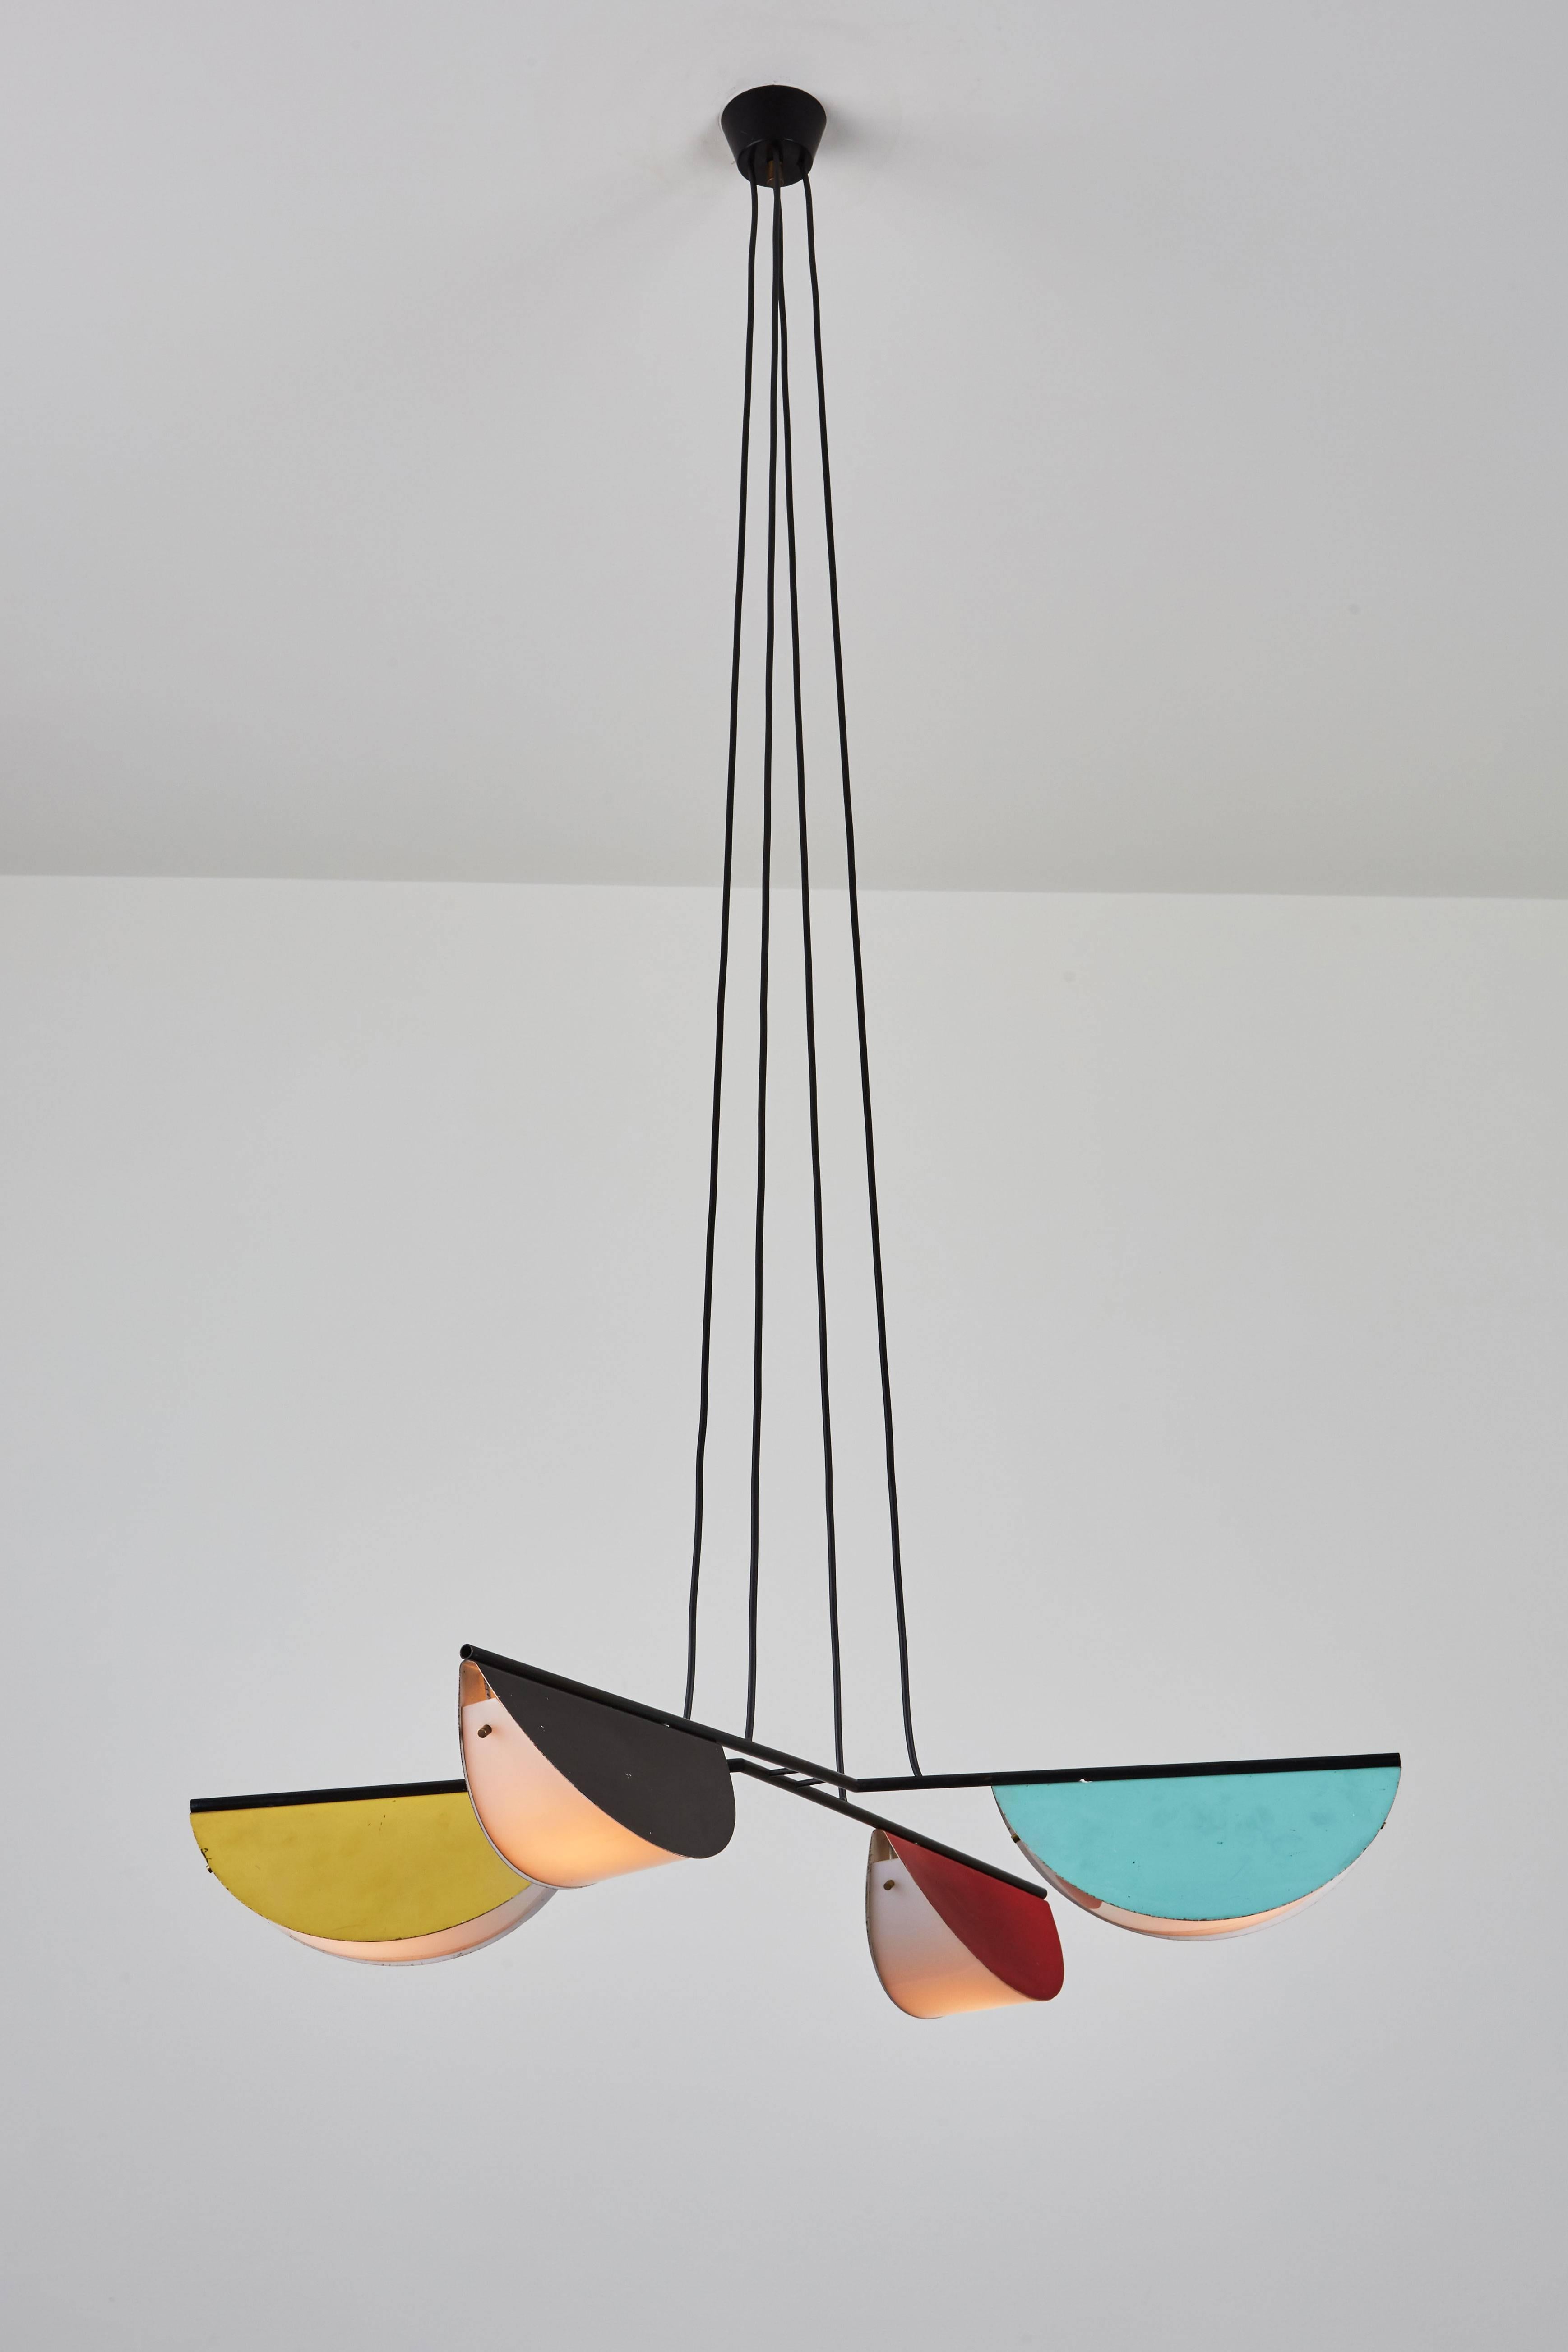 Italian chandelier with four individually colored shades. Painted metal and acrylic with brass hardware. Original canopy. Rewired for US junction boxes. Each shades takes an E26 40 W maximum bulb. Overall drop can be adjusted.